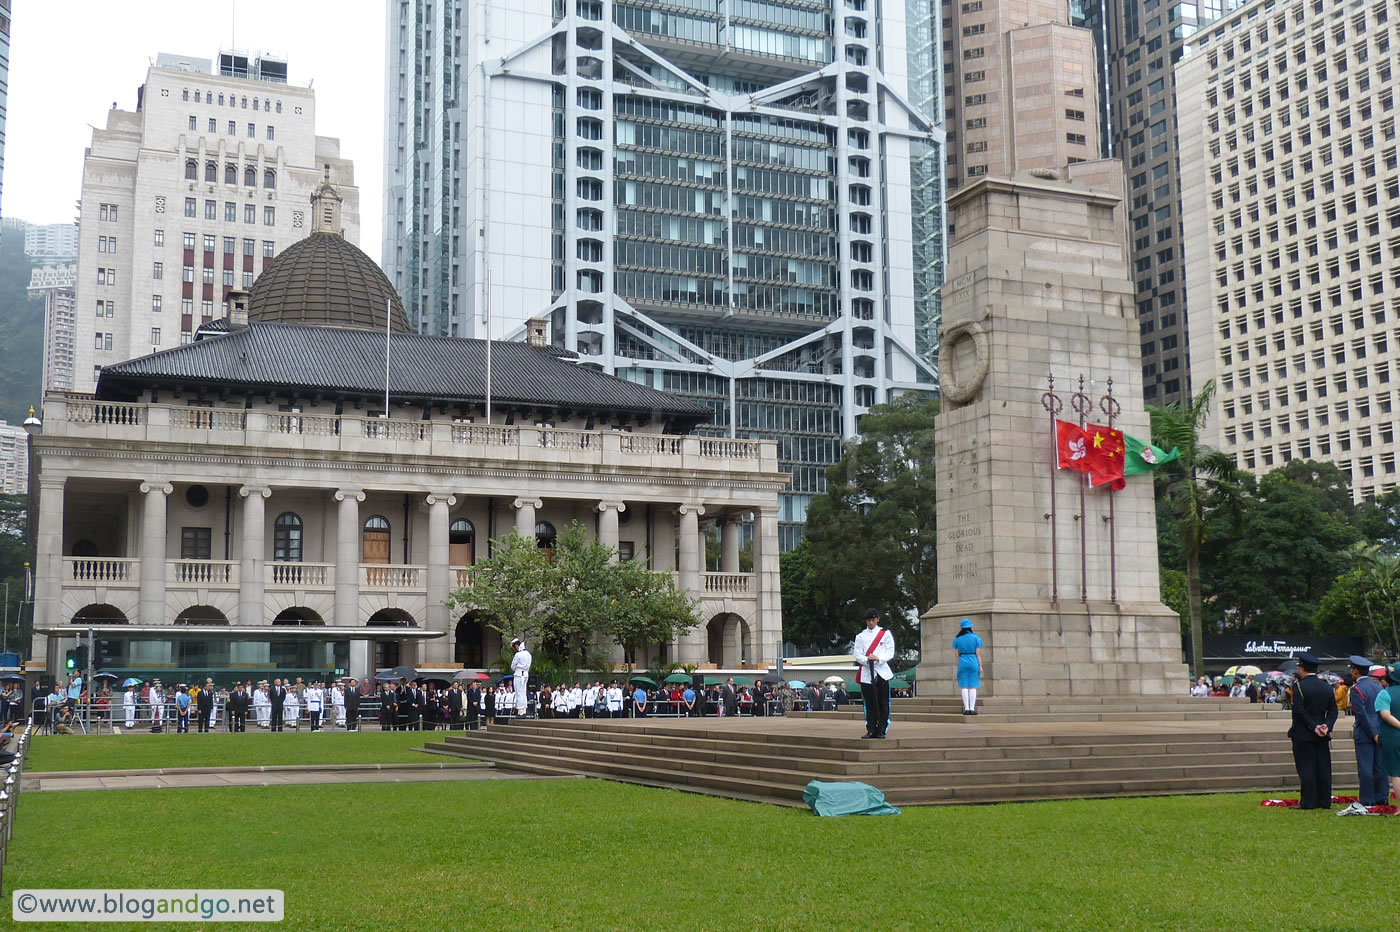 Old Supreme Court Building and Cenotaph (10 Nov 2013)